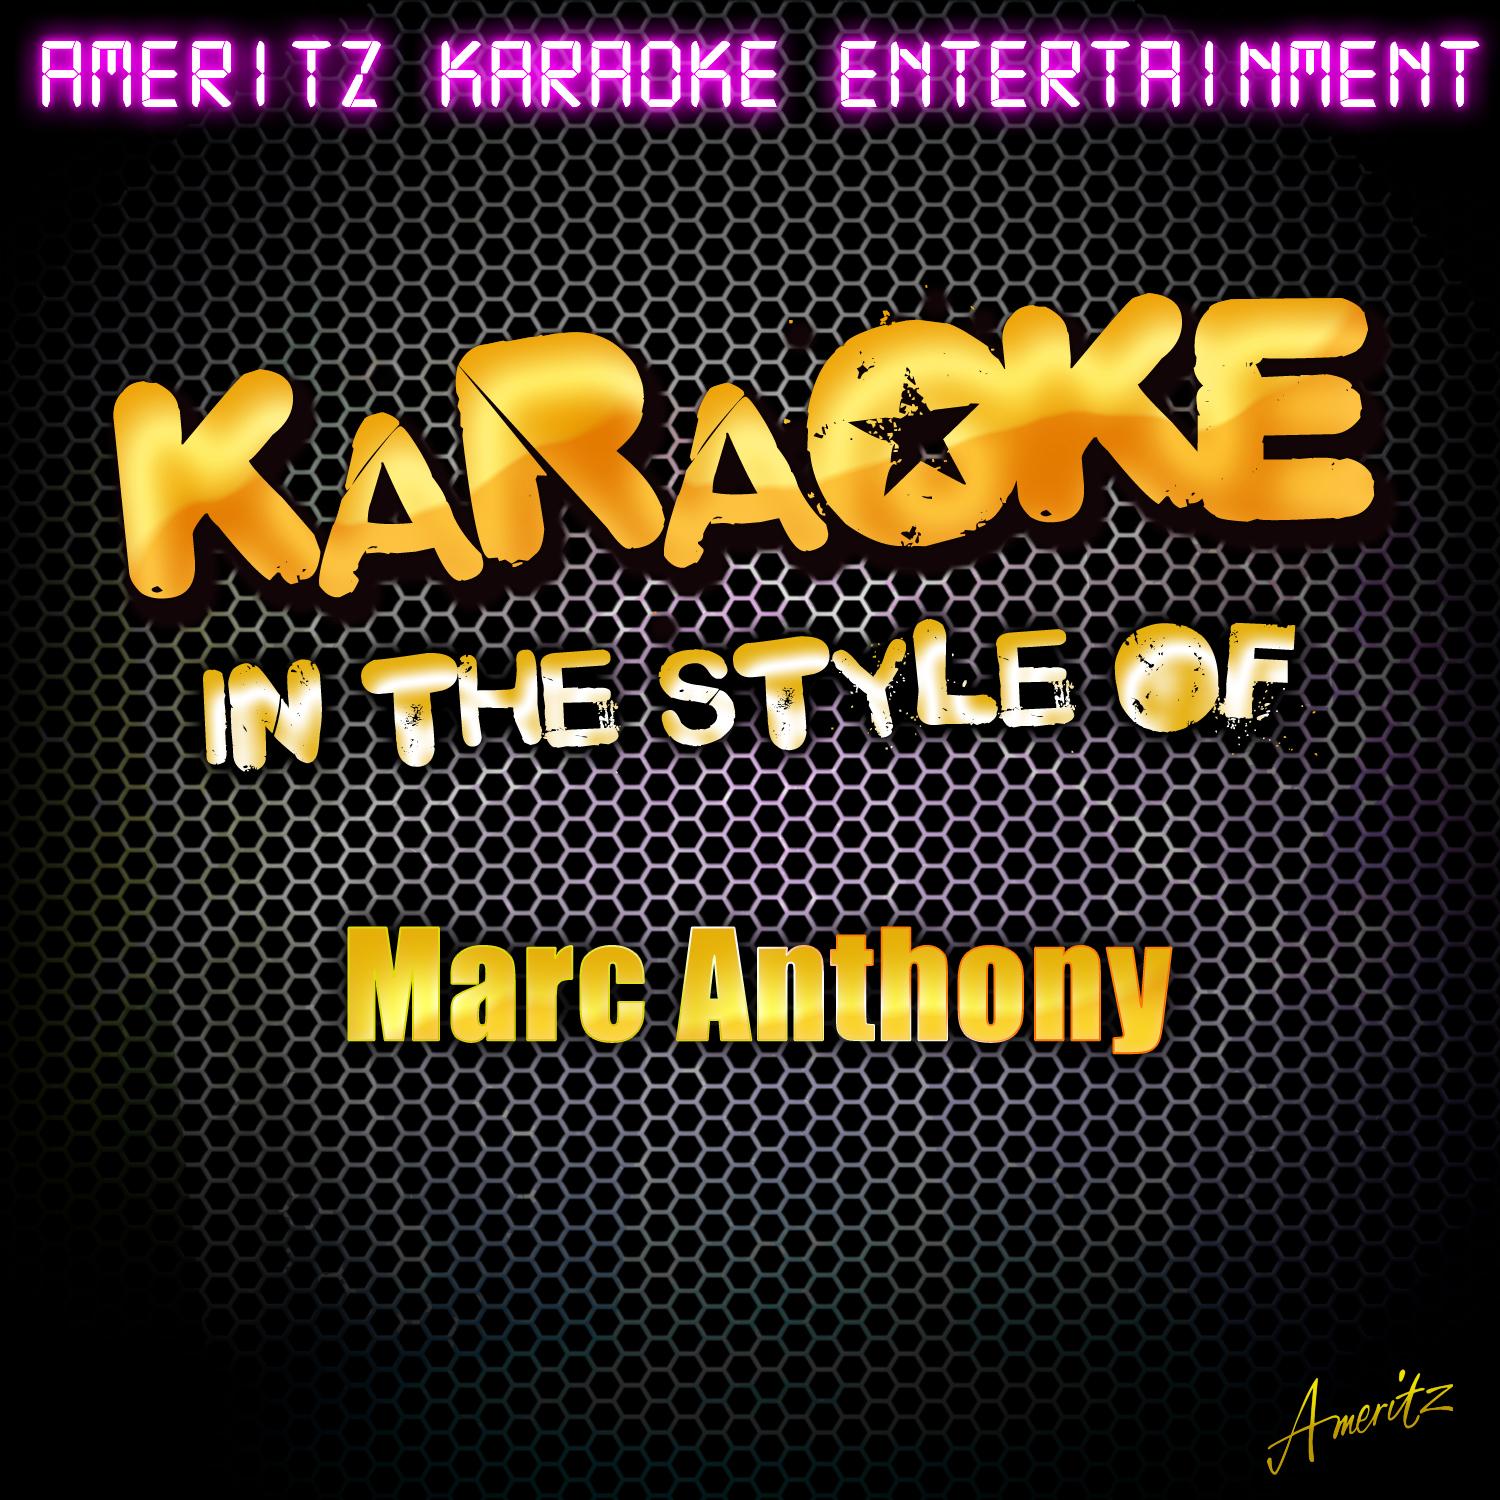 When I Dream At Night (In the Style of Marc Anthony) [Karaoke Version]